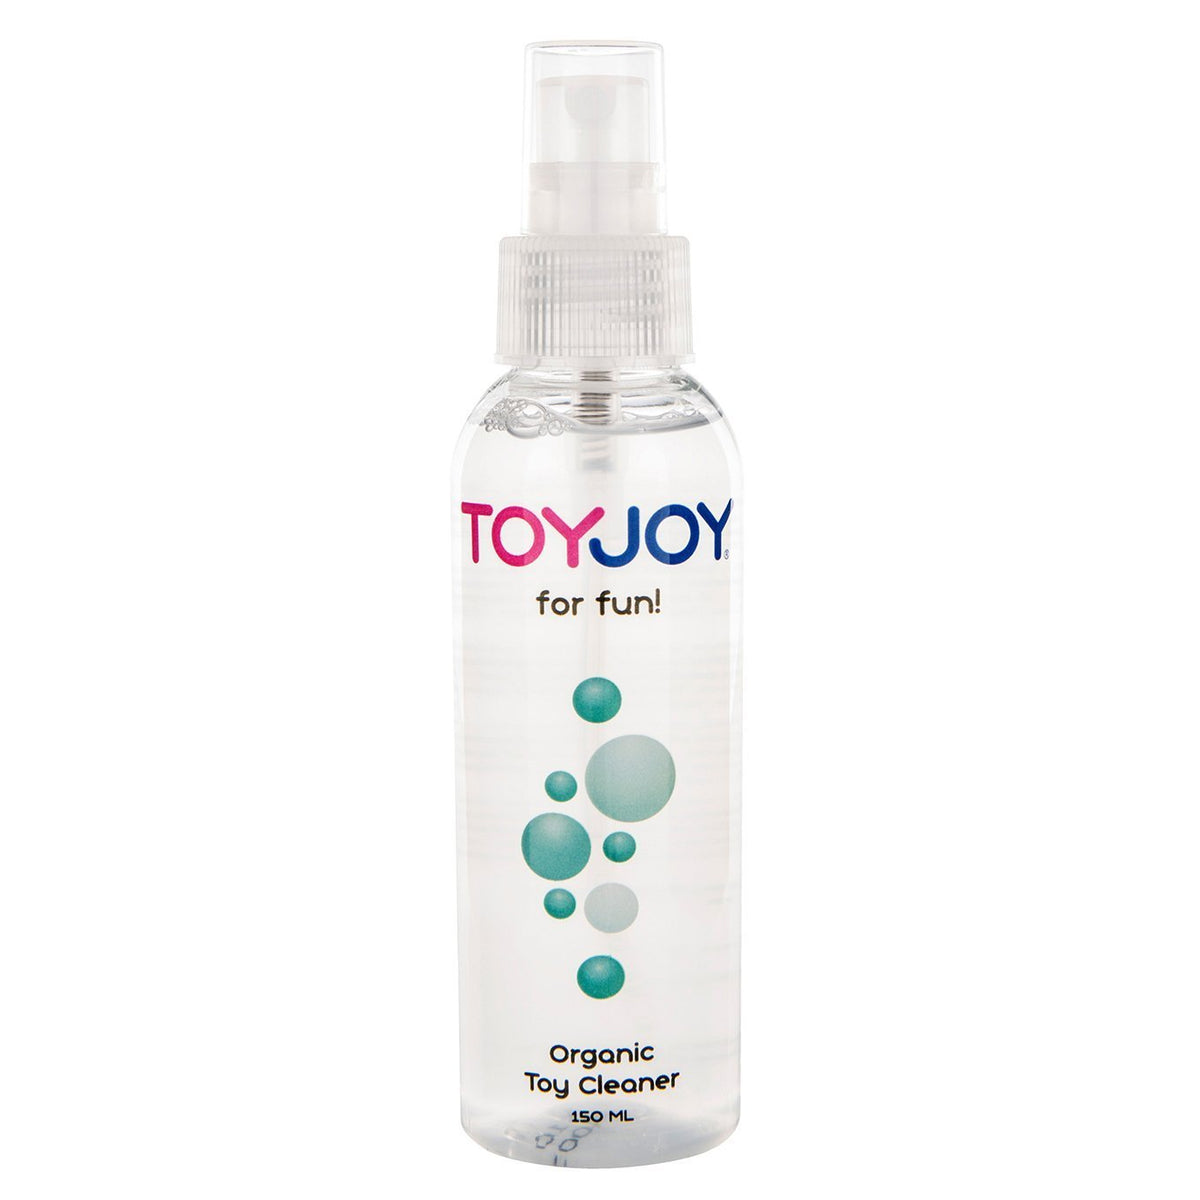 ToyJoy - Organic Toy Cleaner Spray 150 ml -  Toy Cleaners  Durio.sg